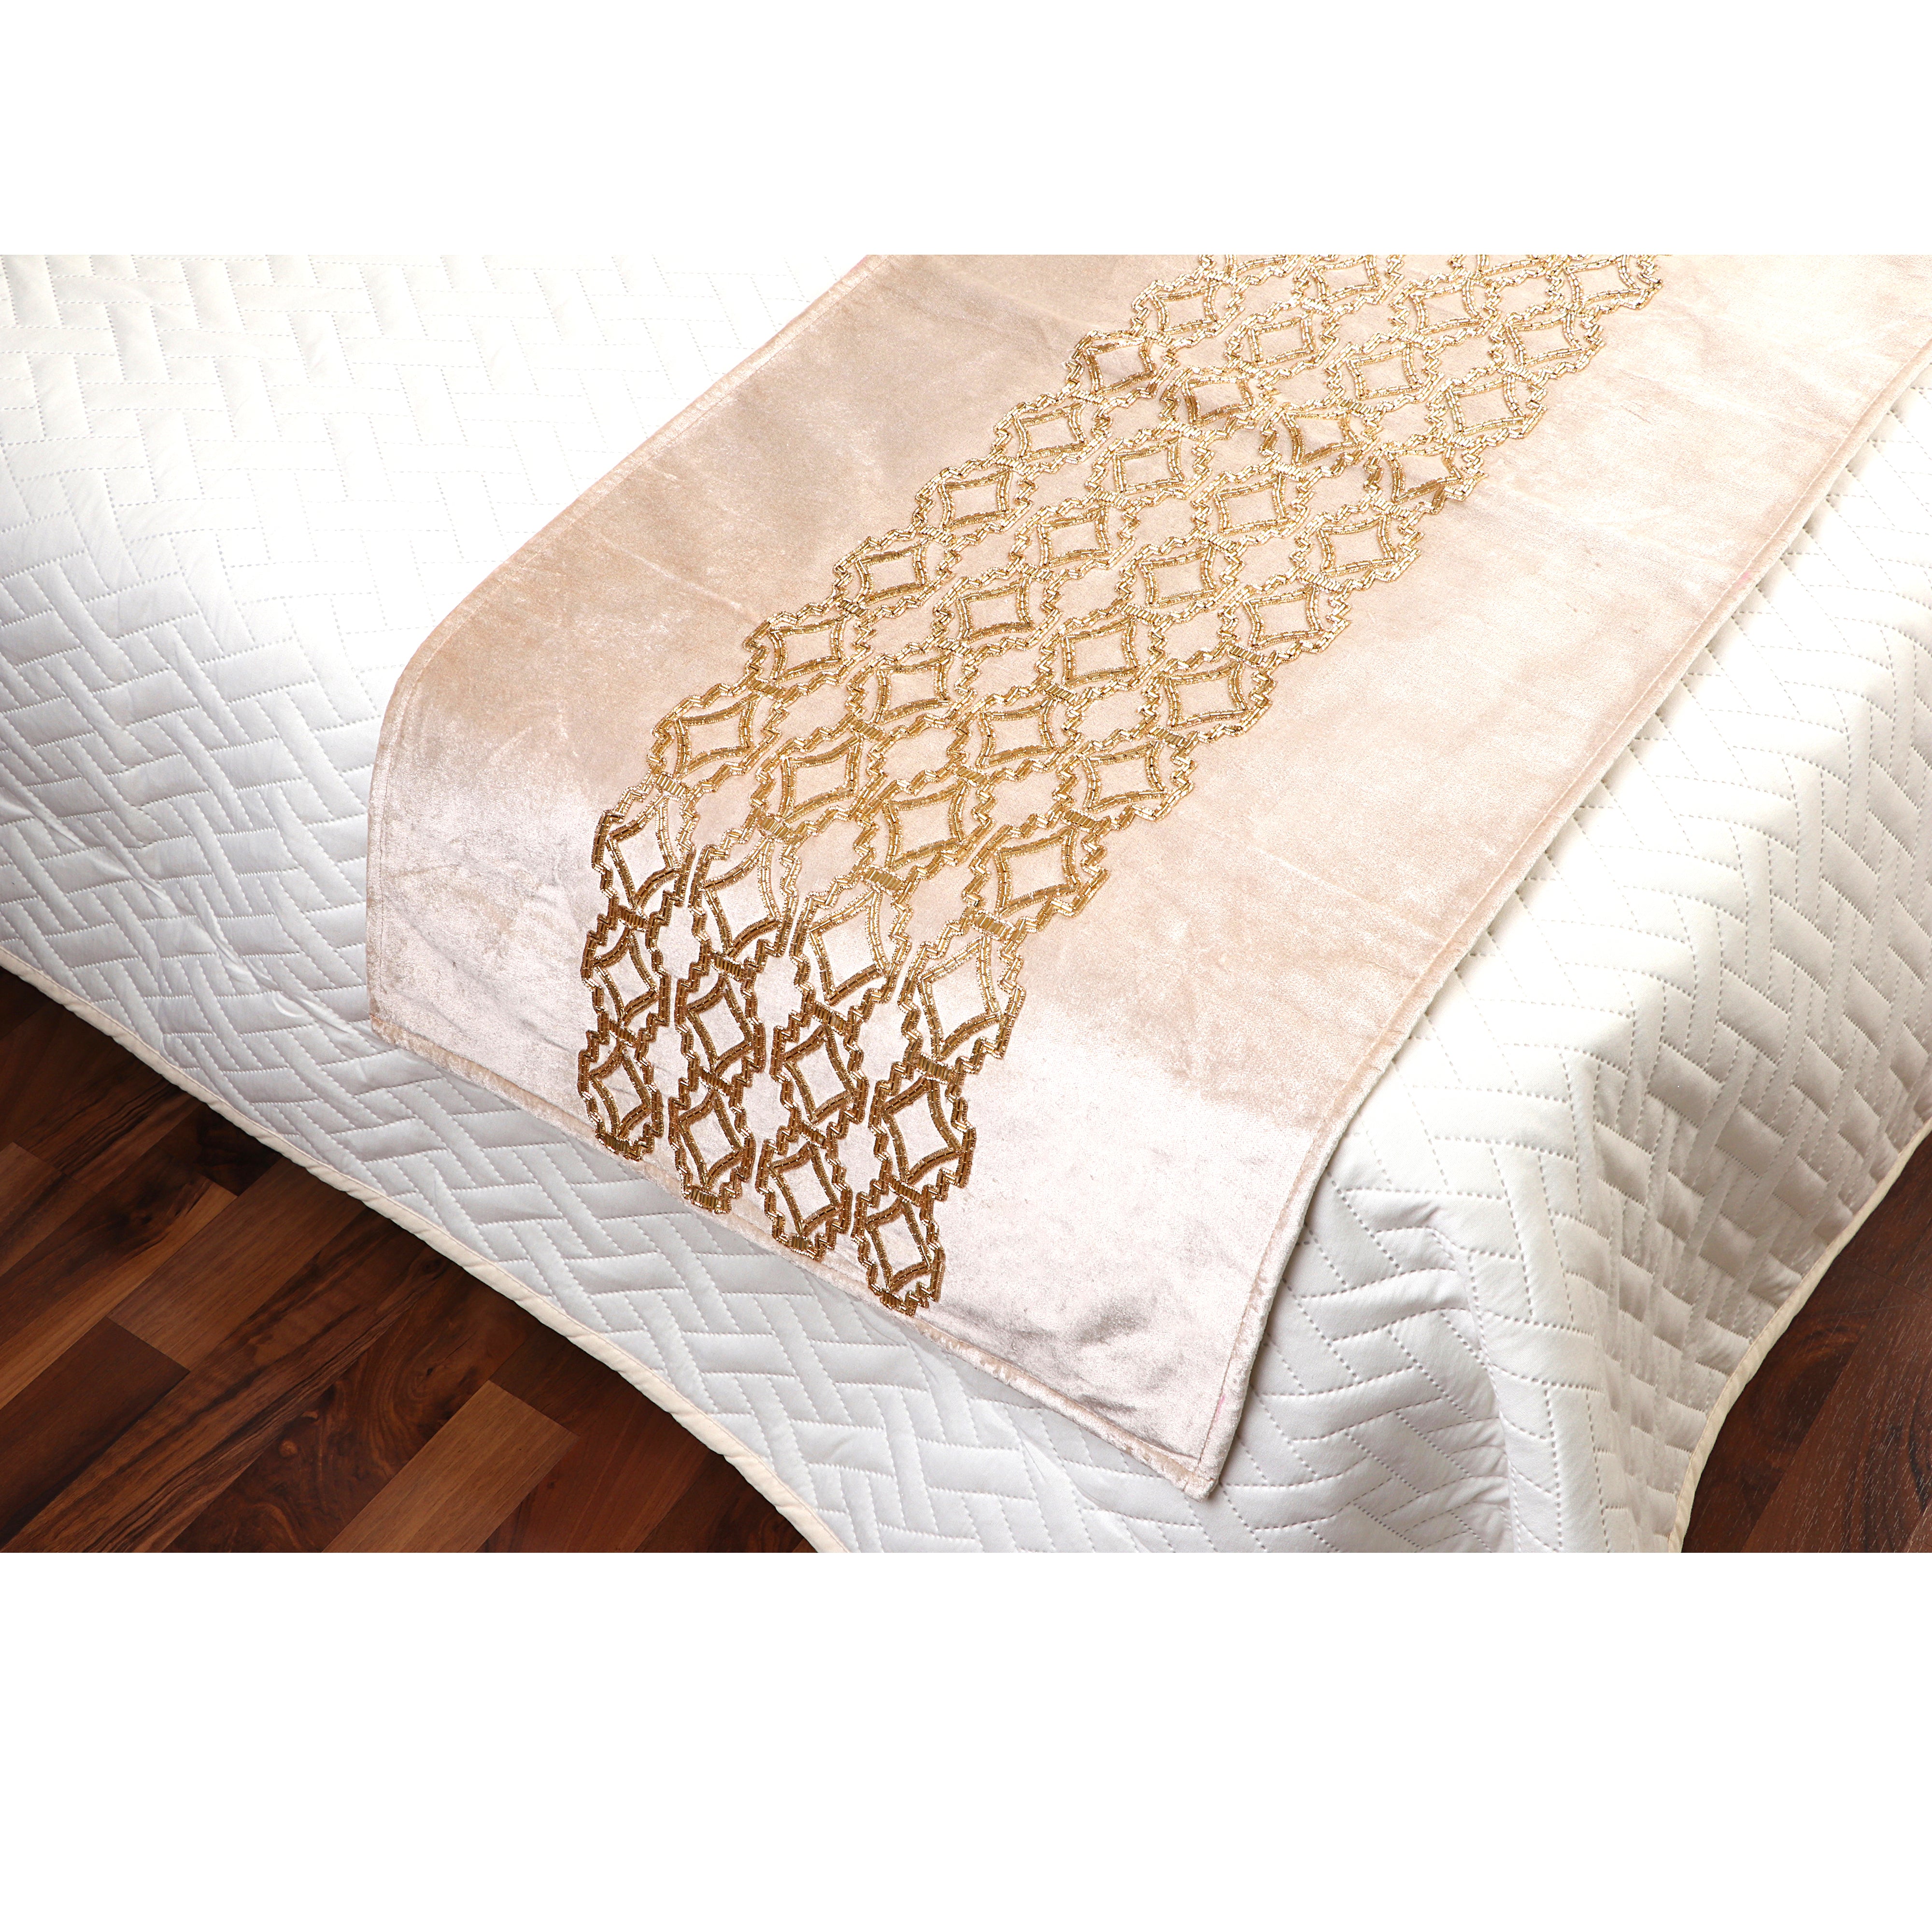 The Vintage criss cross Beige Velvet Bed Runner With Matching Decorative Throw Pillows Beaded in Criss cross pattern